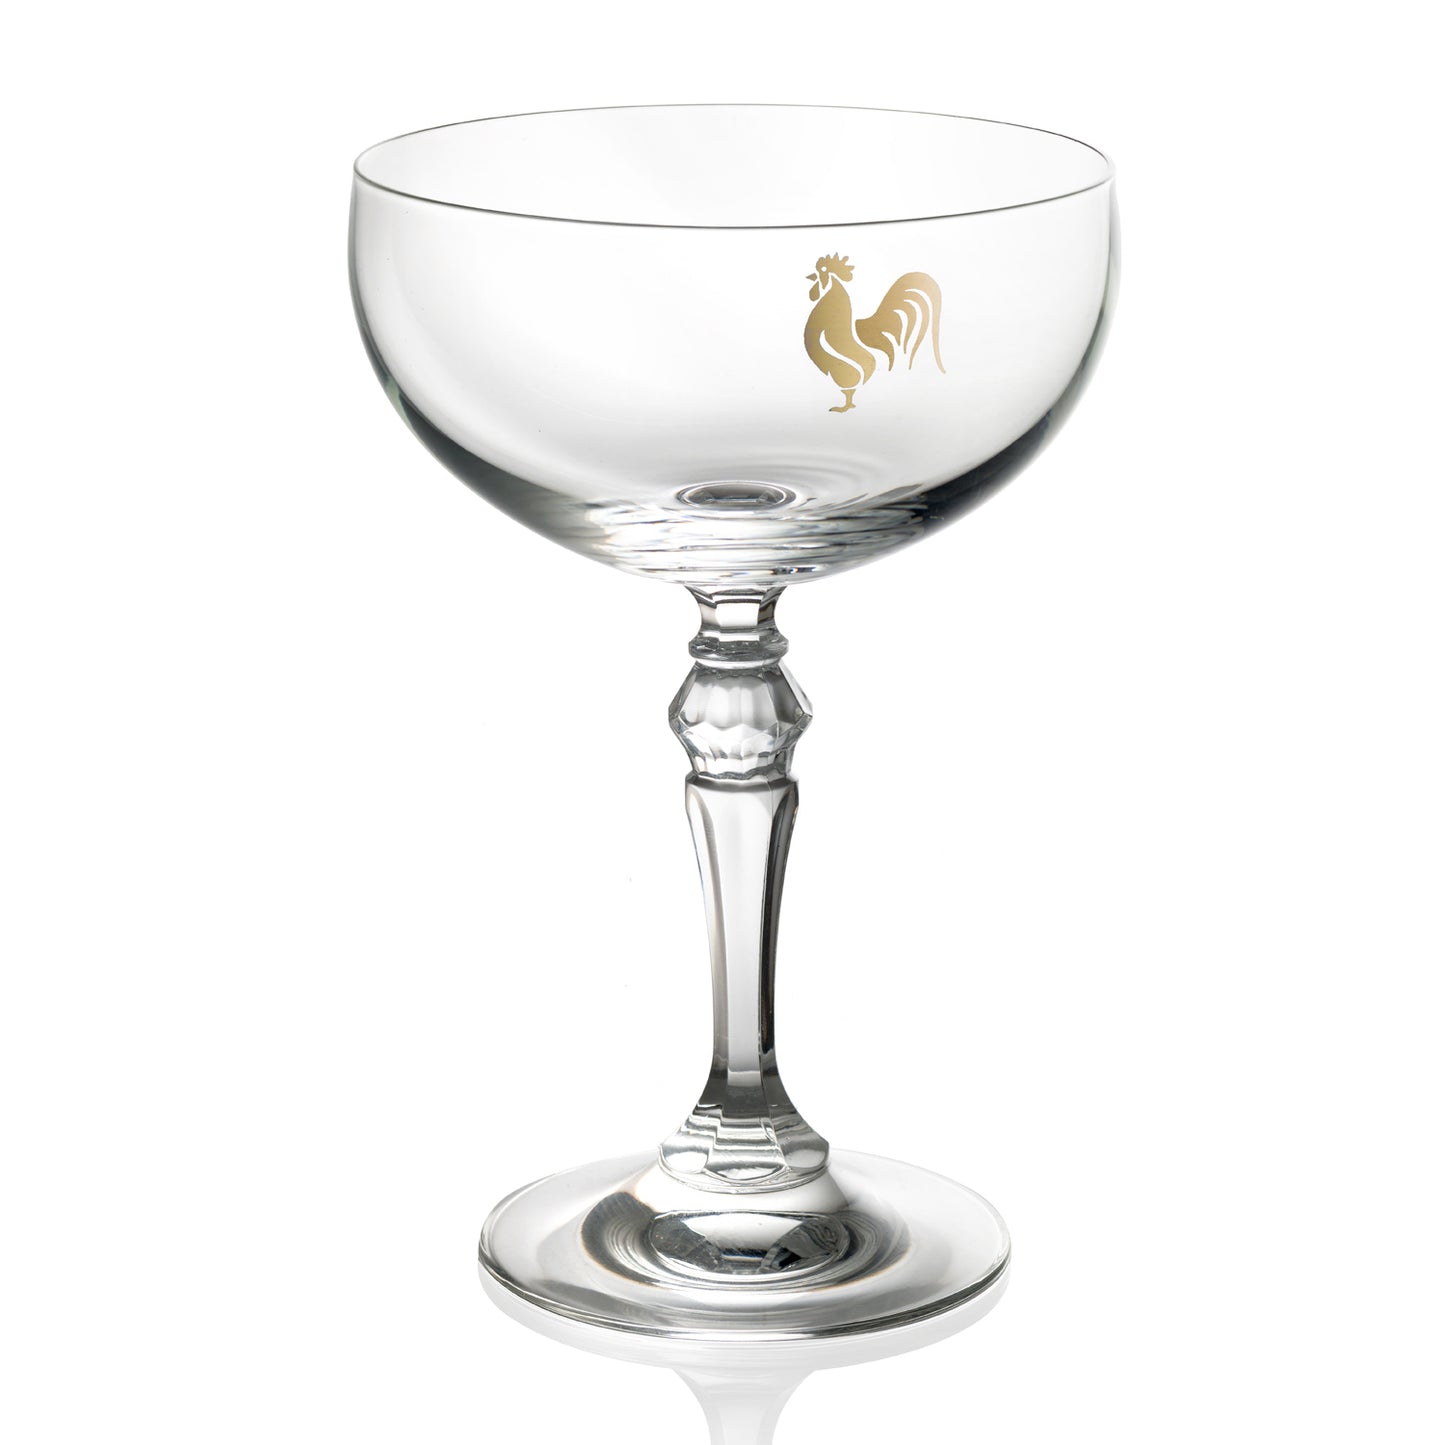 Glassmakers Italia The Bartender's Signature Set of 2 Cocktail Cups, Gold by IVV Glassmakers Italia